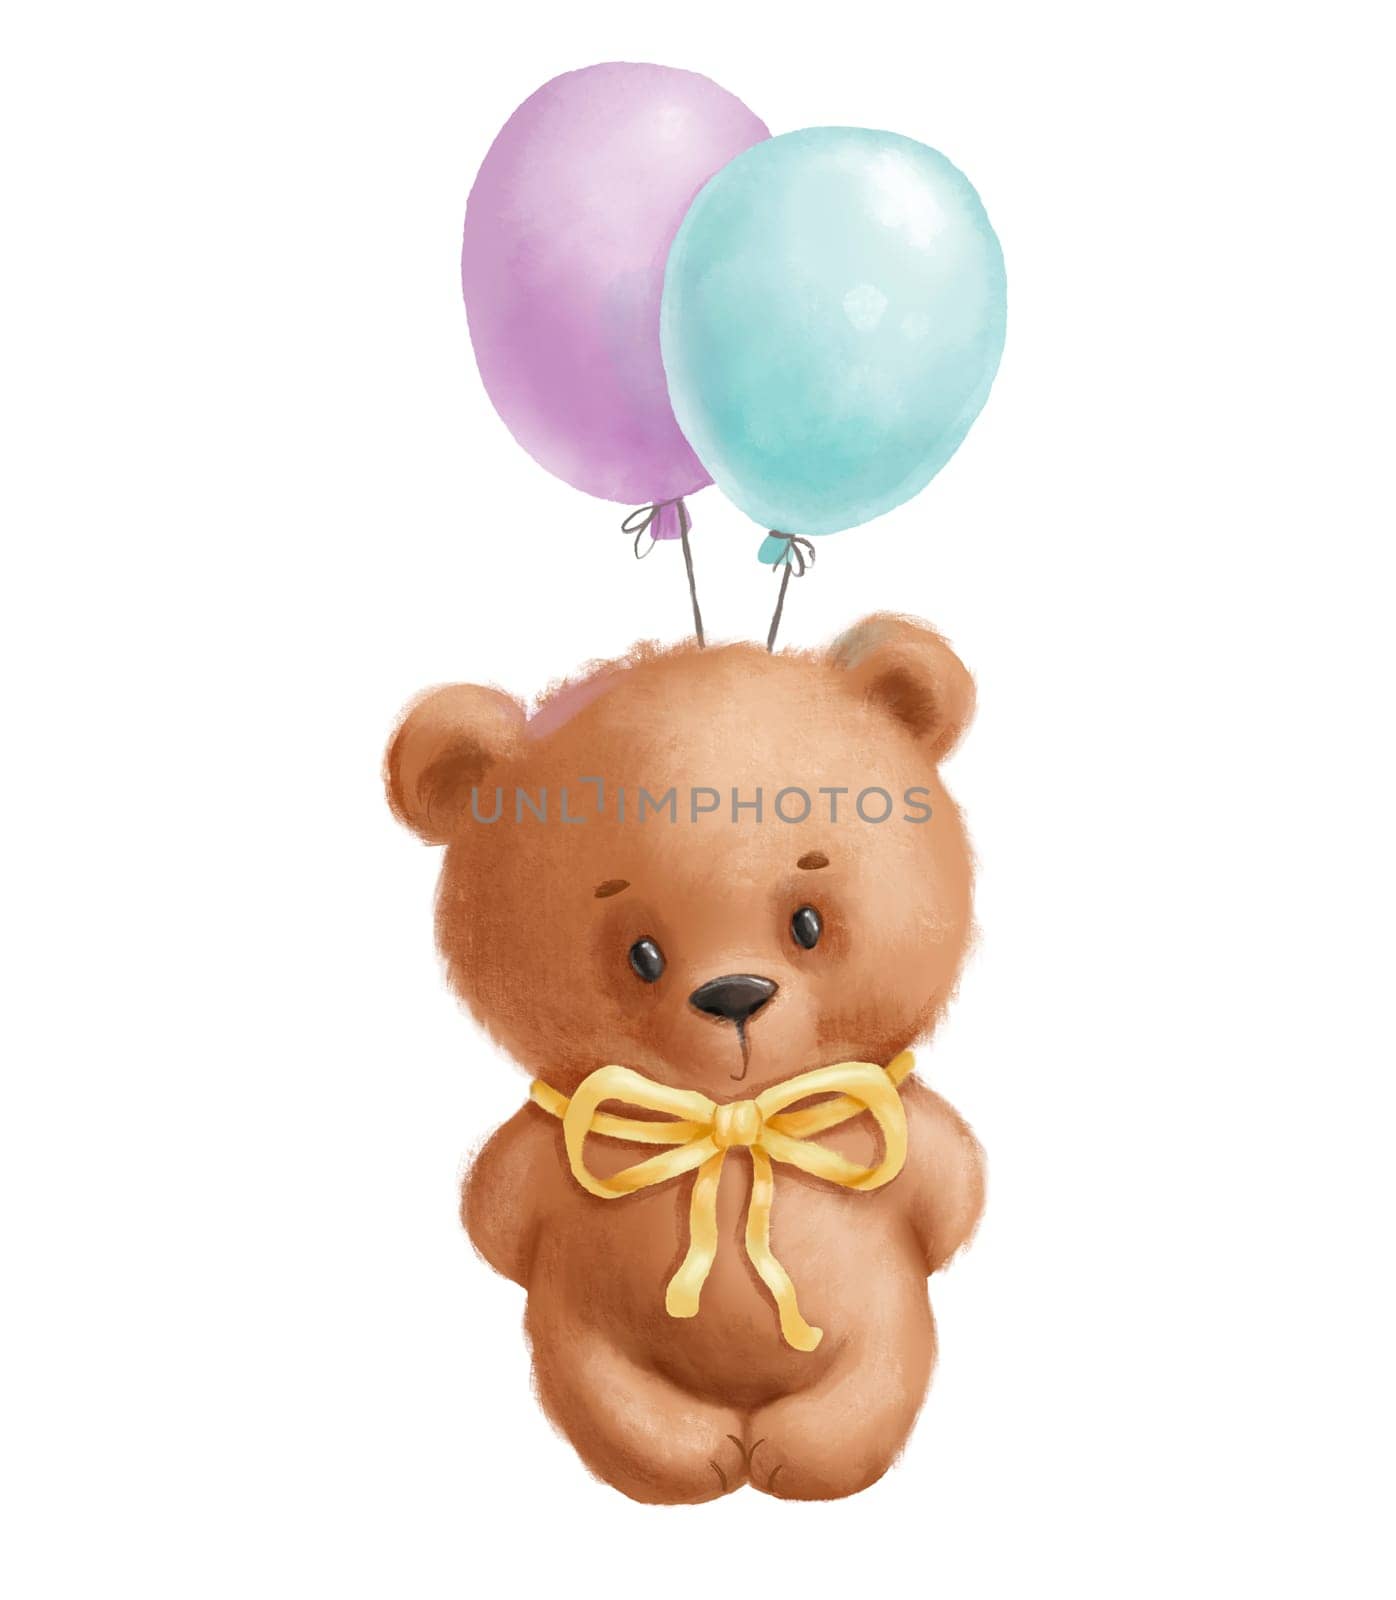 Cute teddy bear with bow and balloons. Hand darwn cartoon illustration isolated on white background